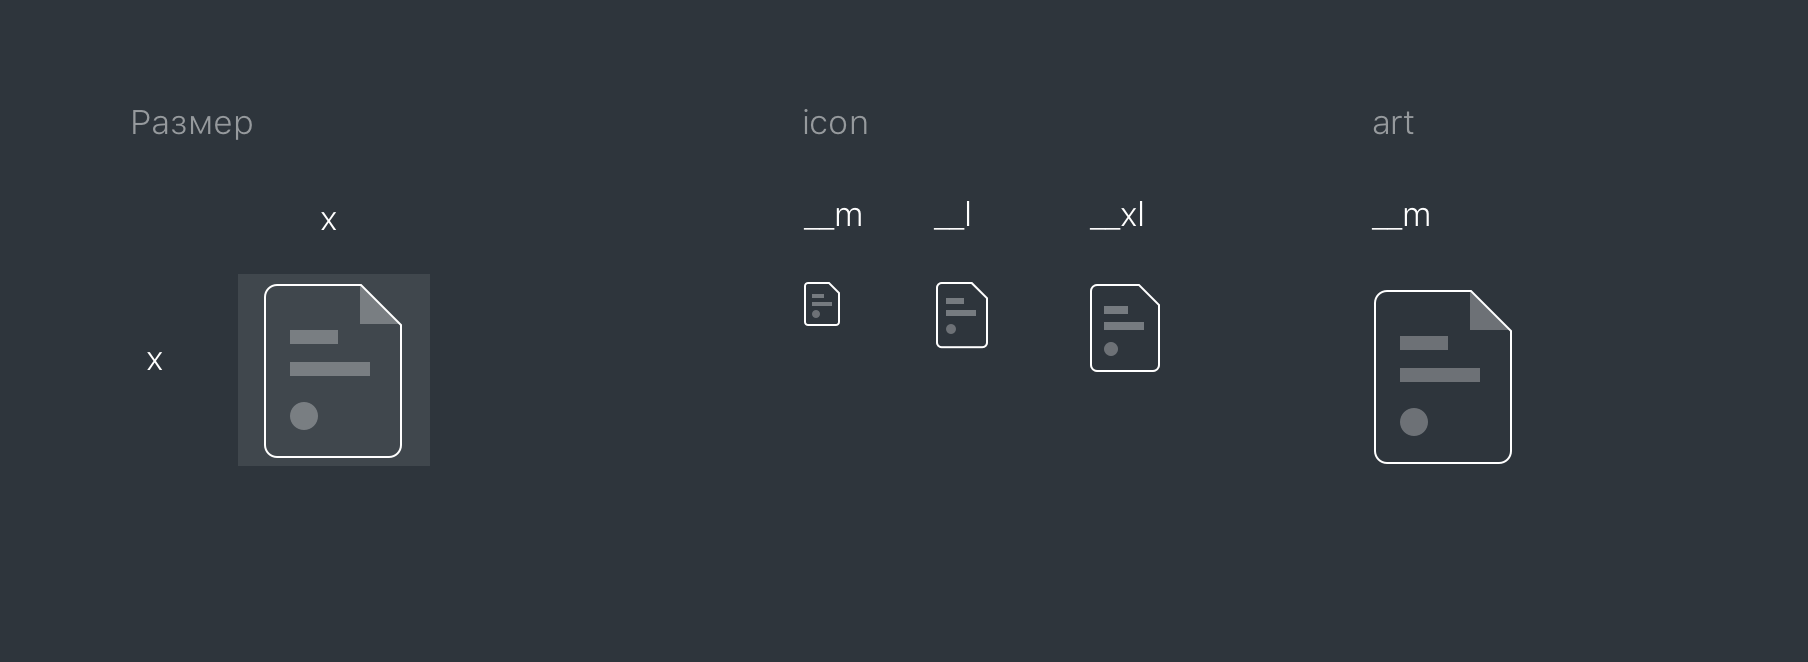 Icons Size